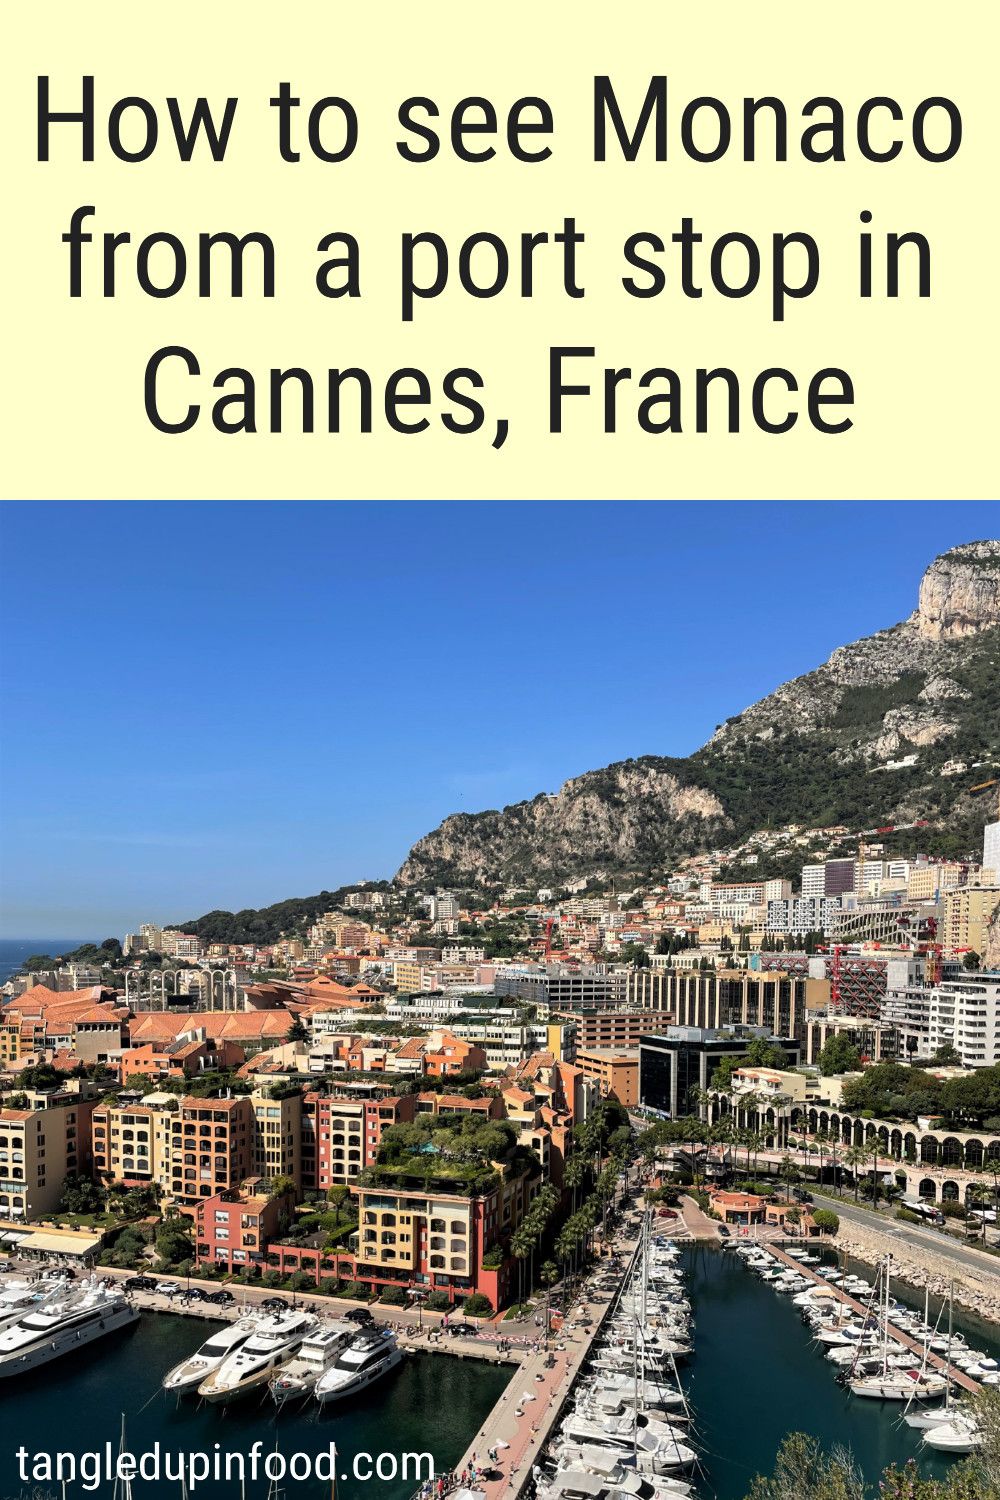 Photo of steep hillside covered with high rises with a port at the bottom and text reading "How to see Monaco from a port stop in Cannes, France"